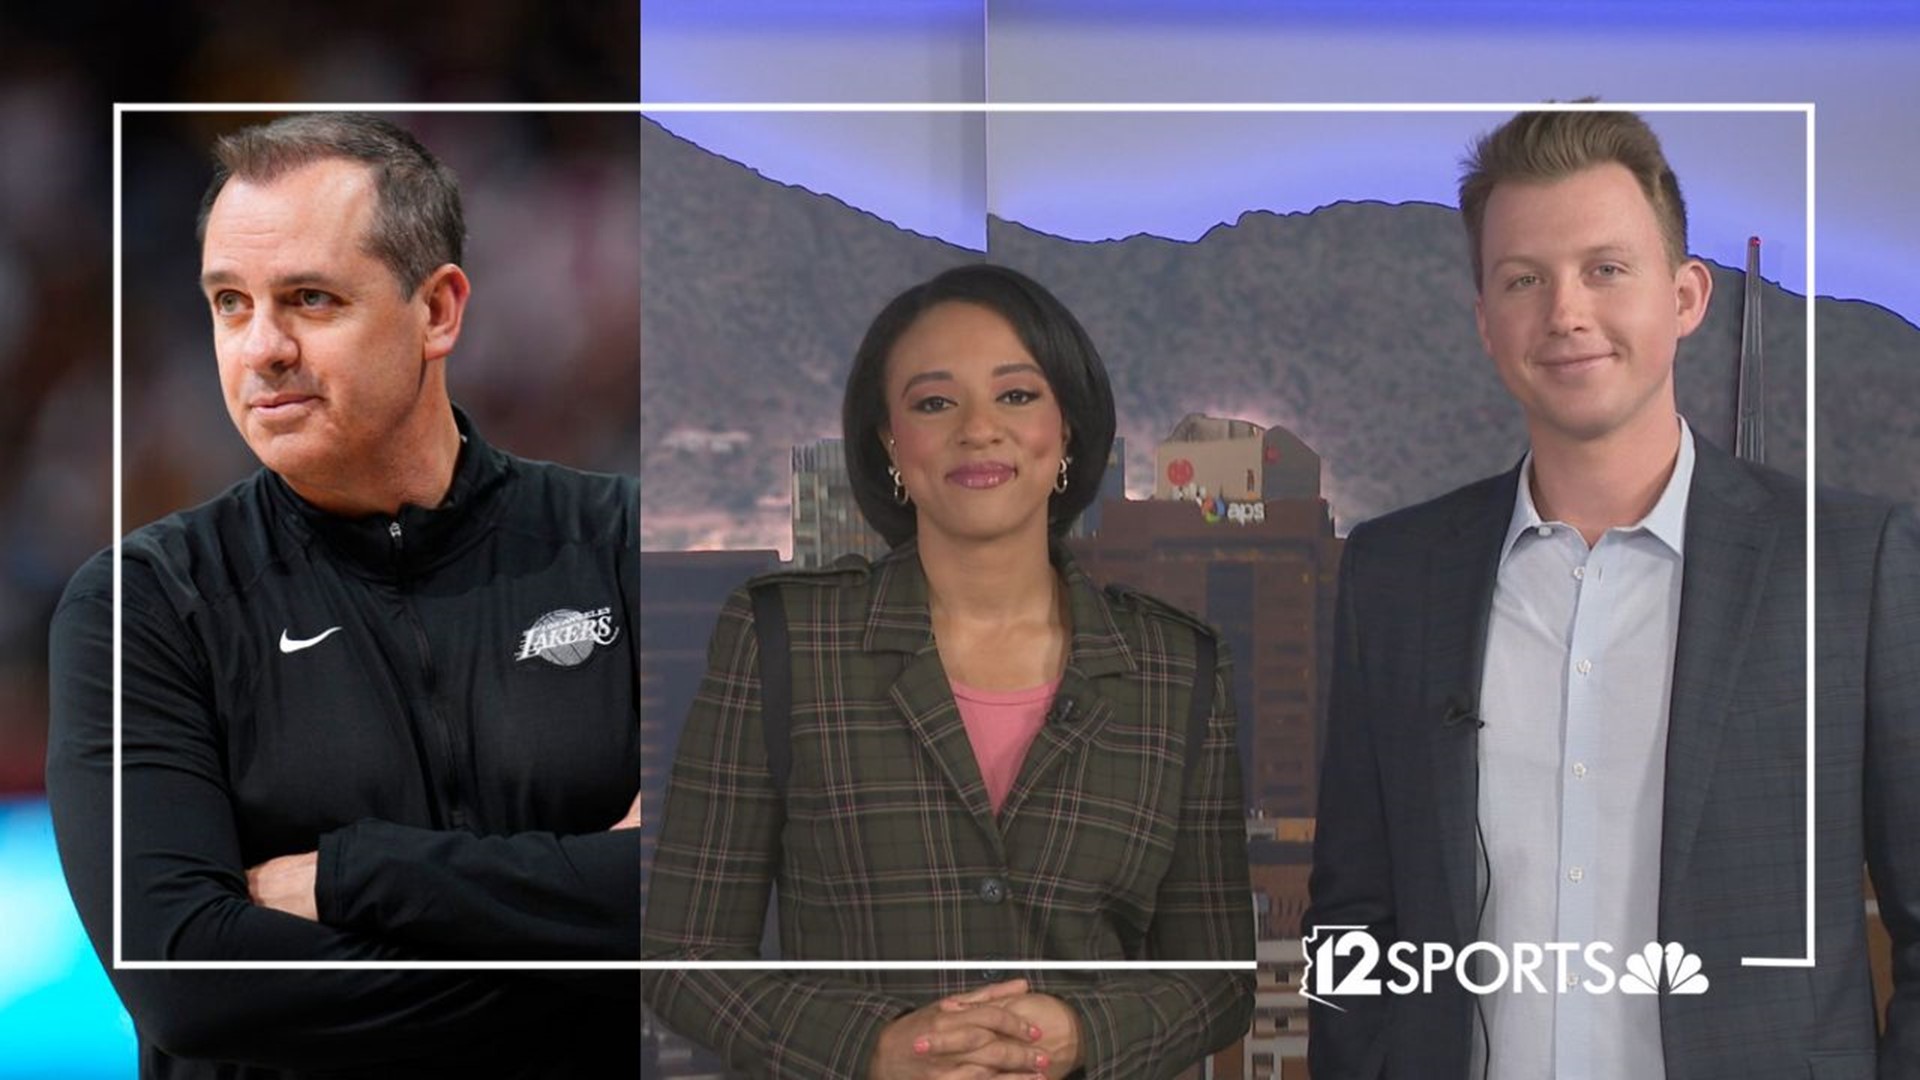 12Sports' Lina Washington and Luke Lyddon react to the breaking news of Frank Vogel expected to be hired as head coach of the Phoenix Suns.